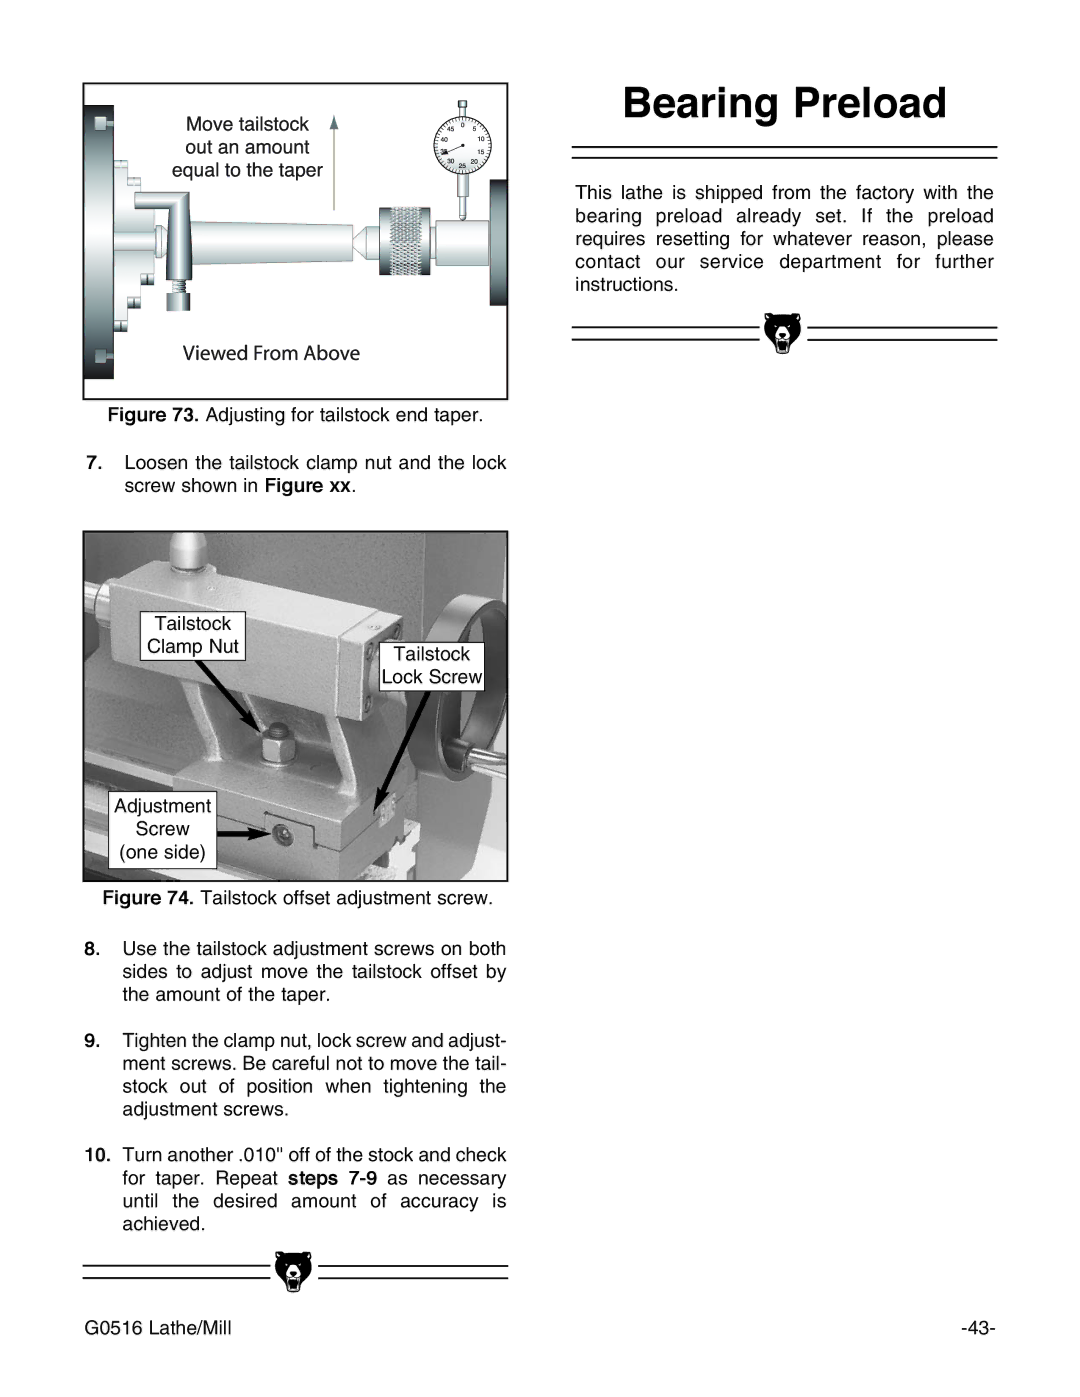 Grizzly G0516 instruction manual Bearing Preload 